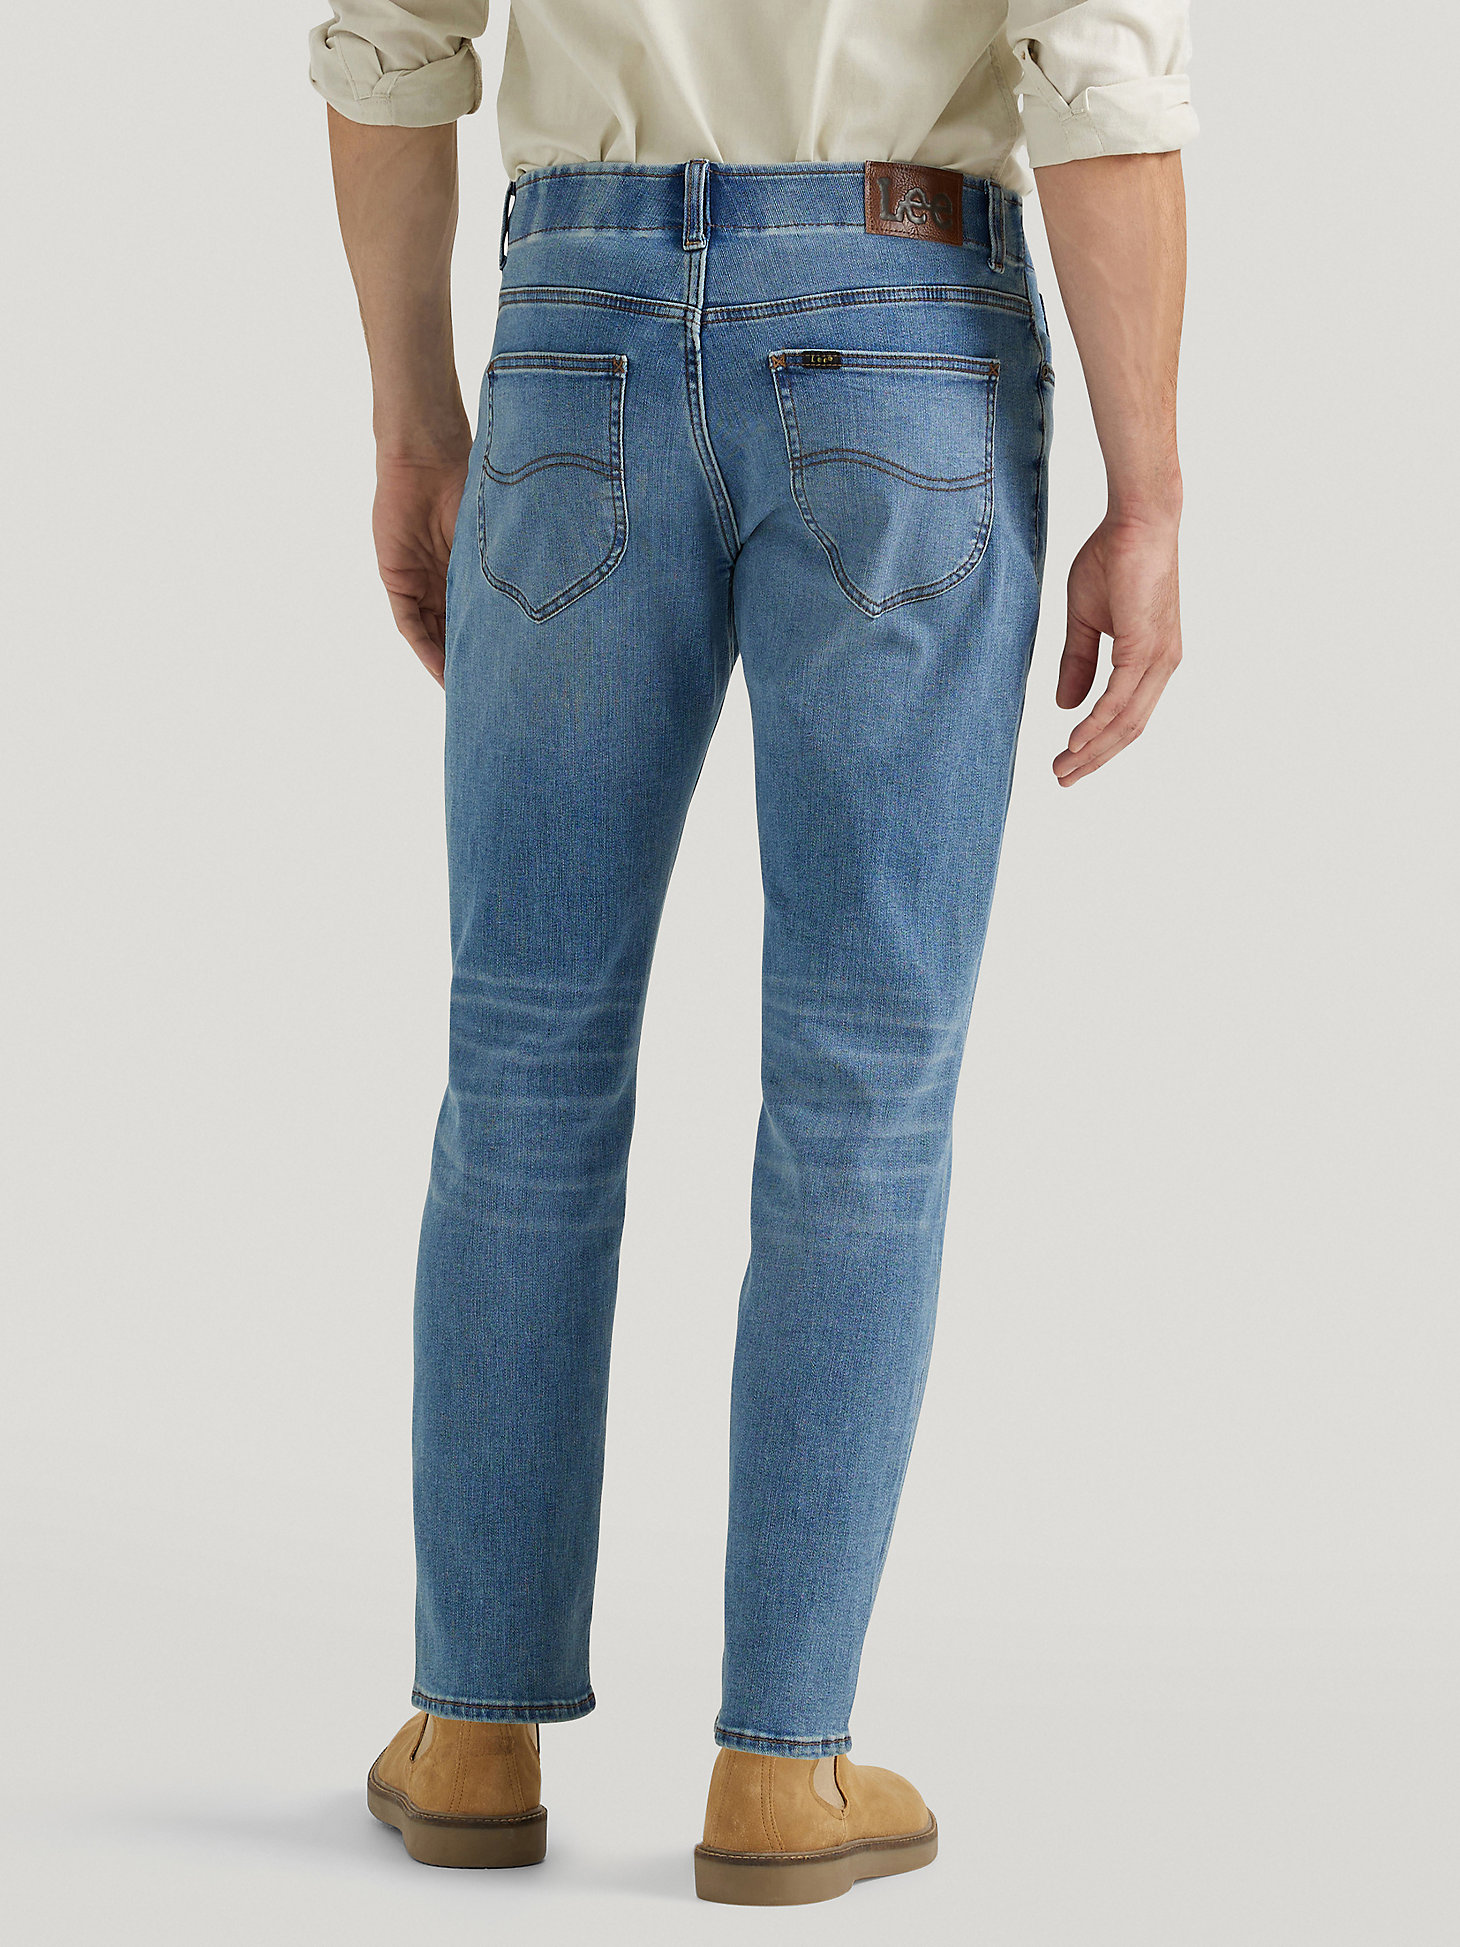 Men's Extreme Motion Straight Fit Tapered Leg Jean in Scott alternative view 2